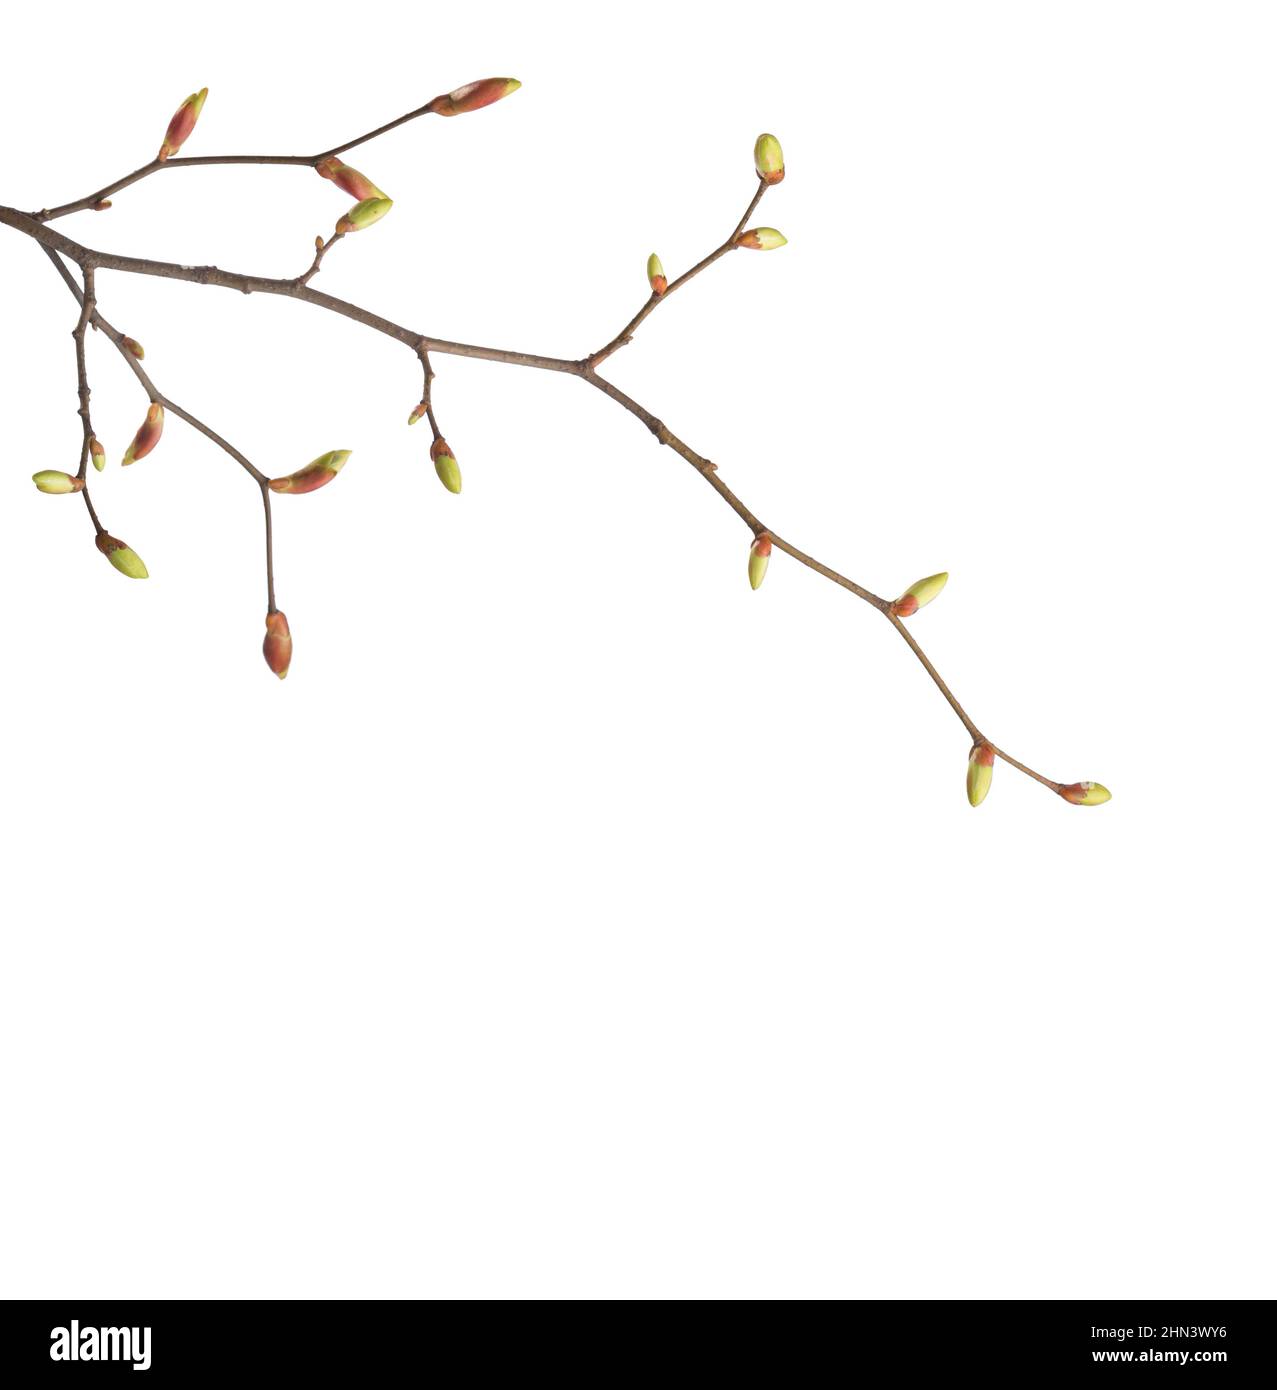 Linden branches  with swollen buds on isolated white background. Stock Photo